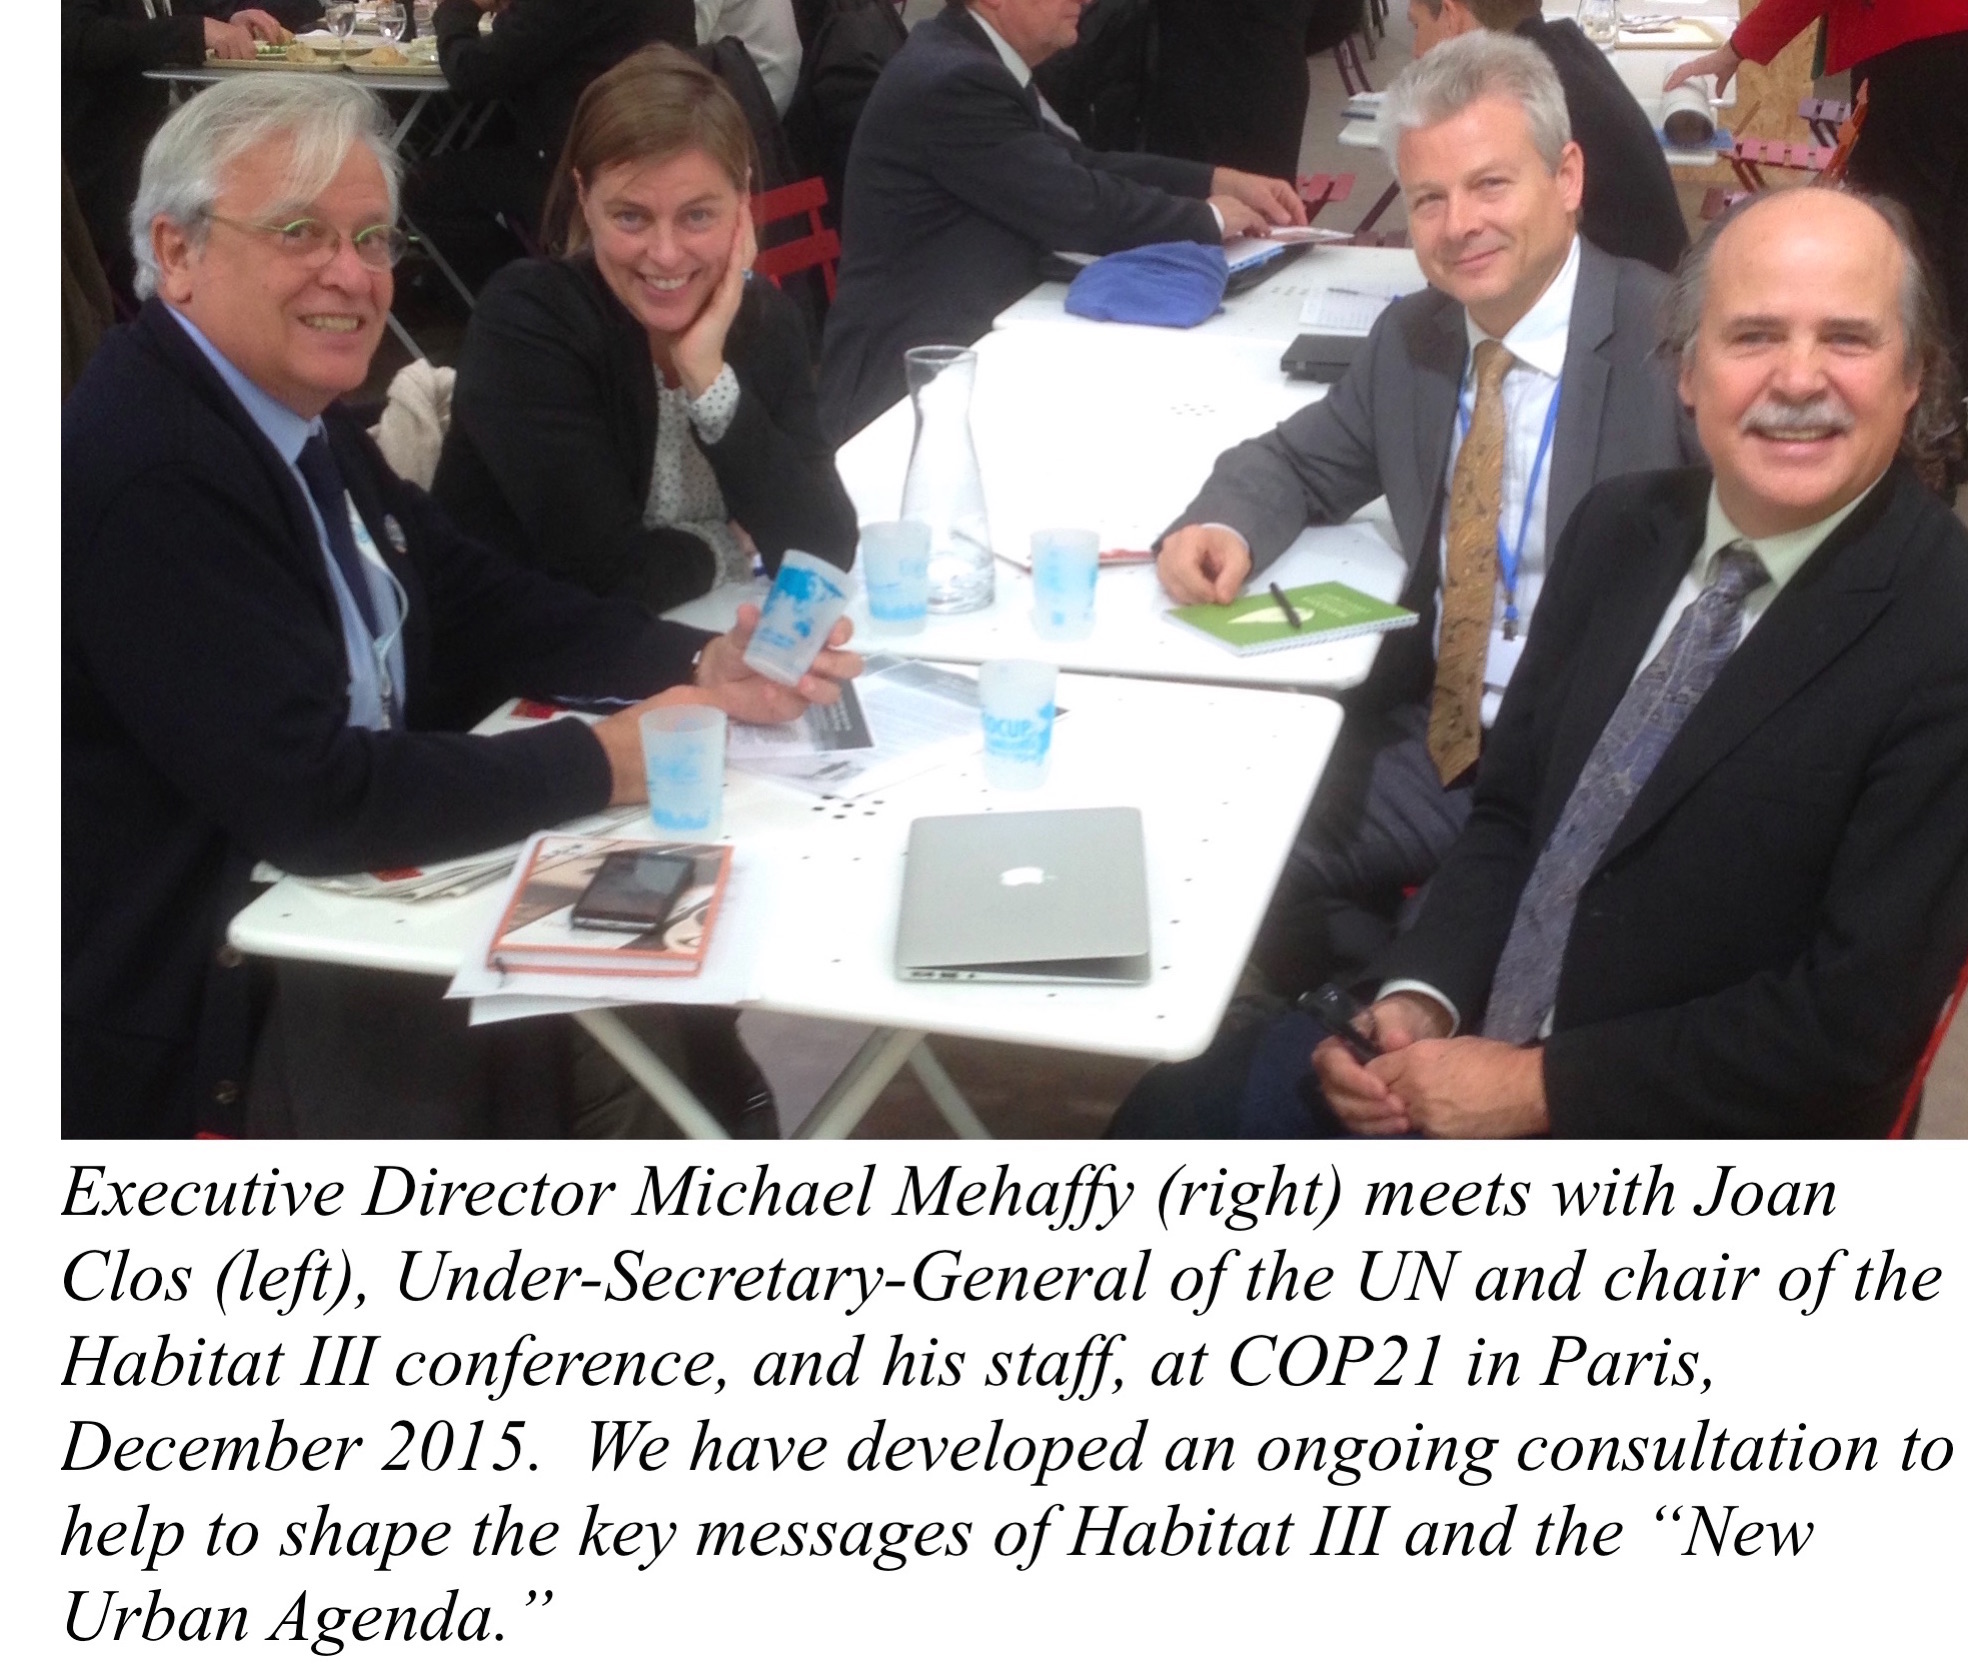 Michael Mehaffy meets with Joan Clos